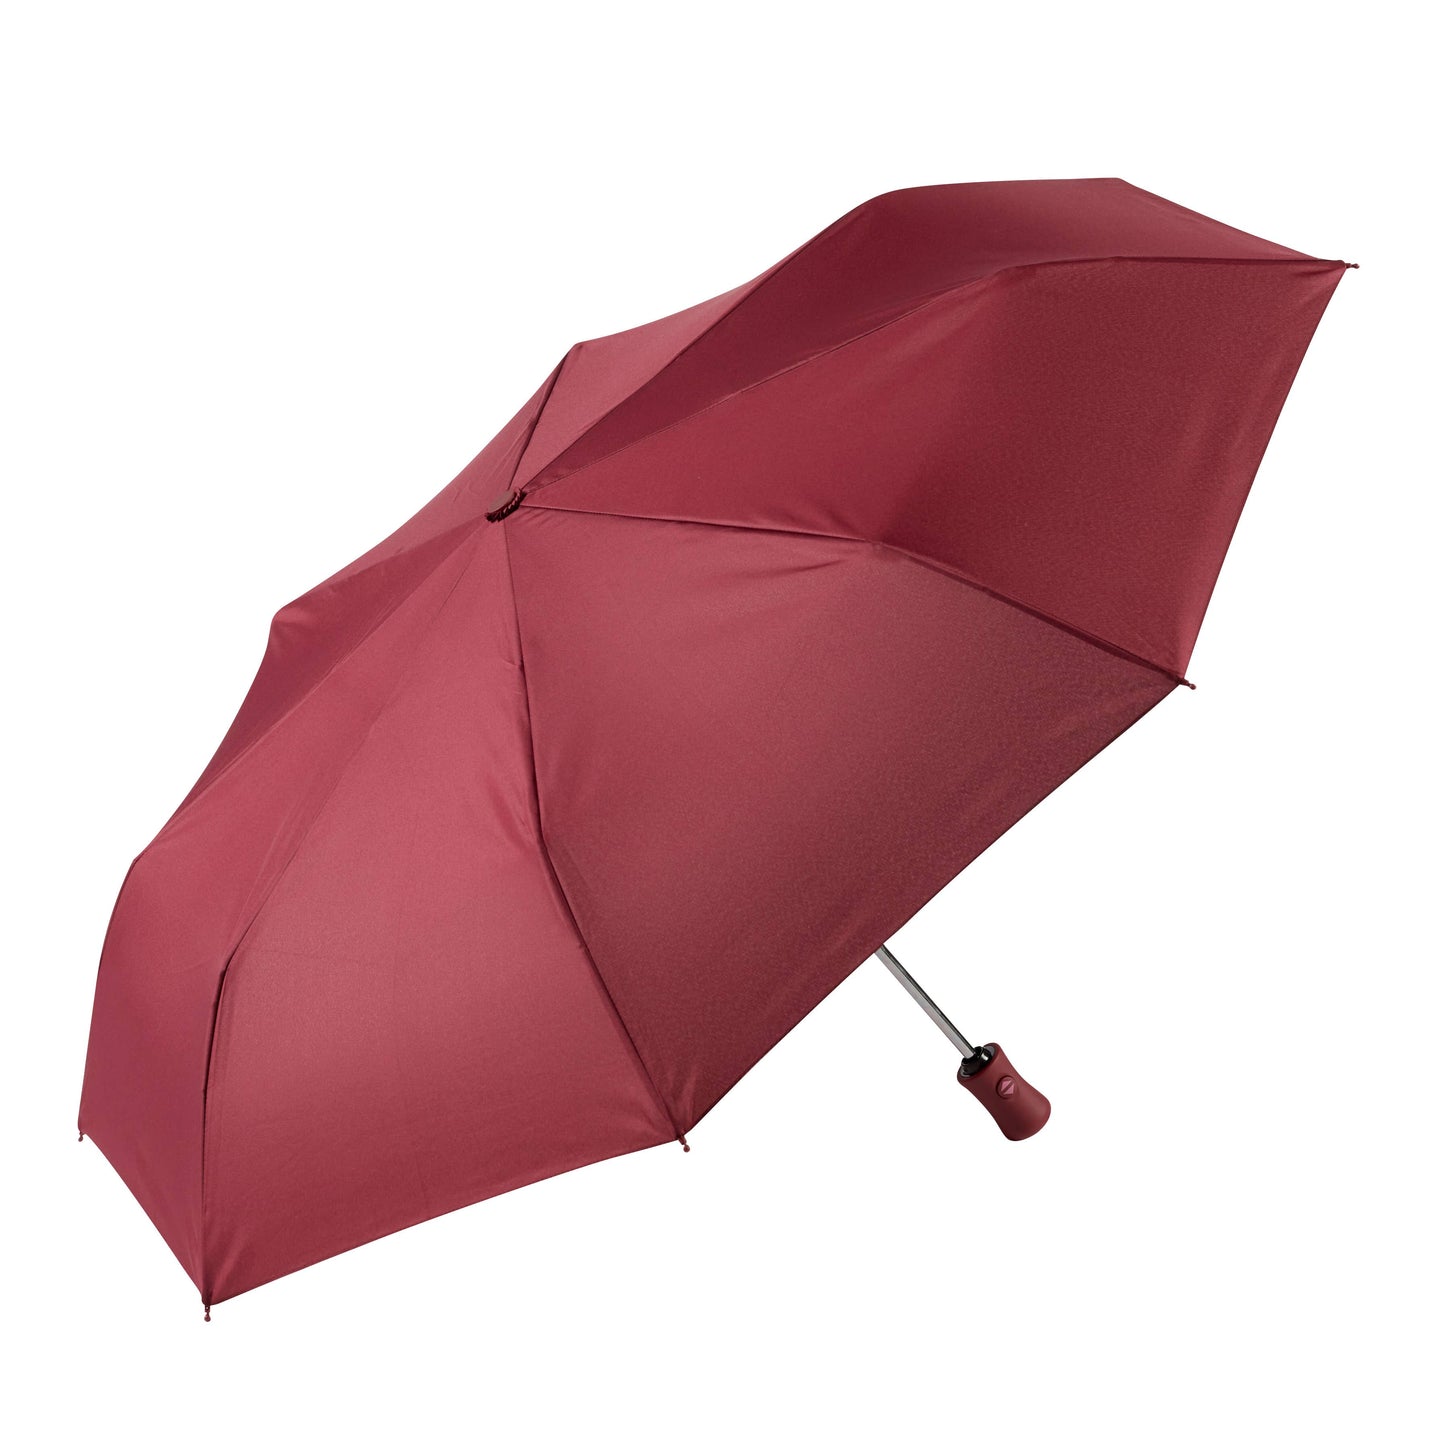 Auto Open/Close Travel Umbrella- Solid Recycled Fabric